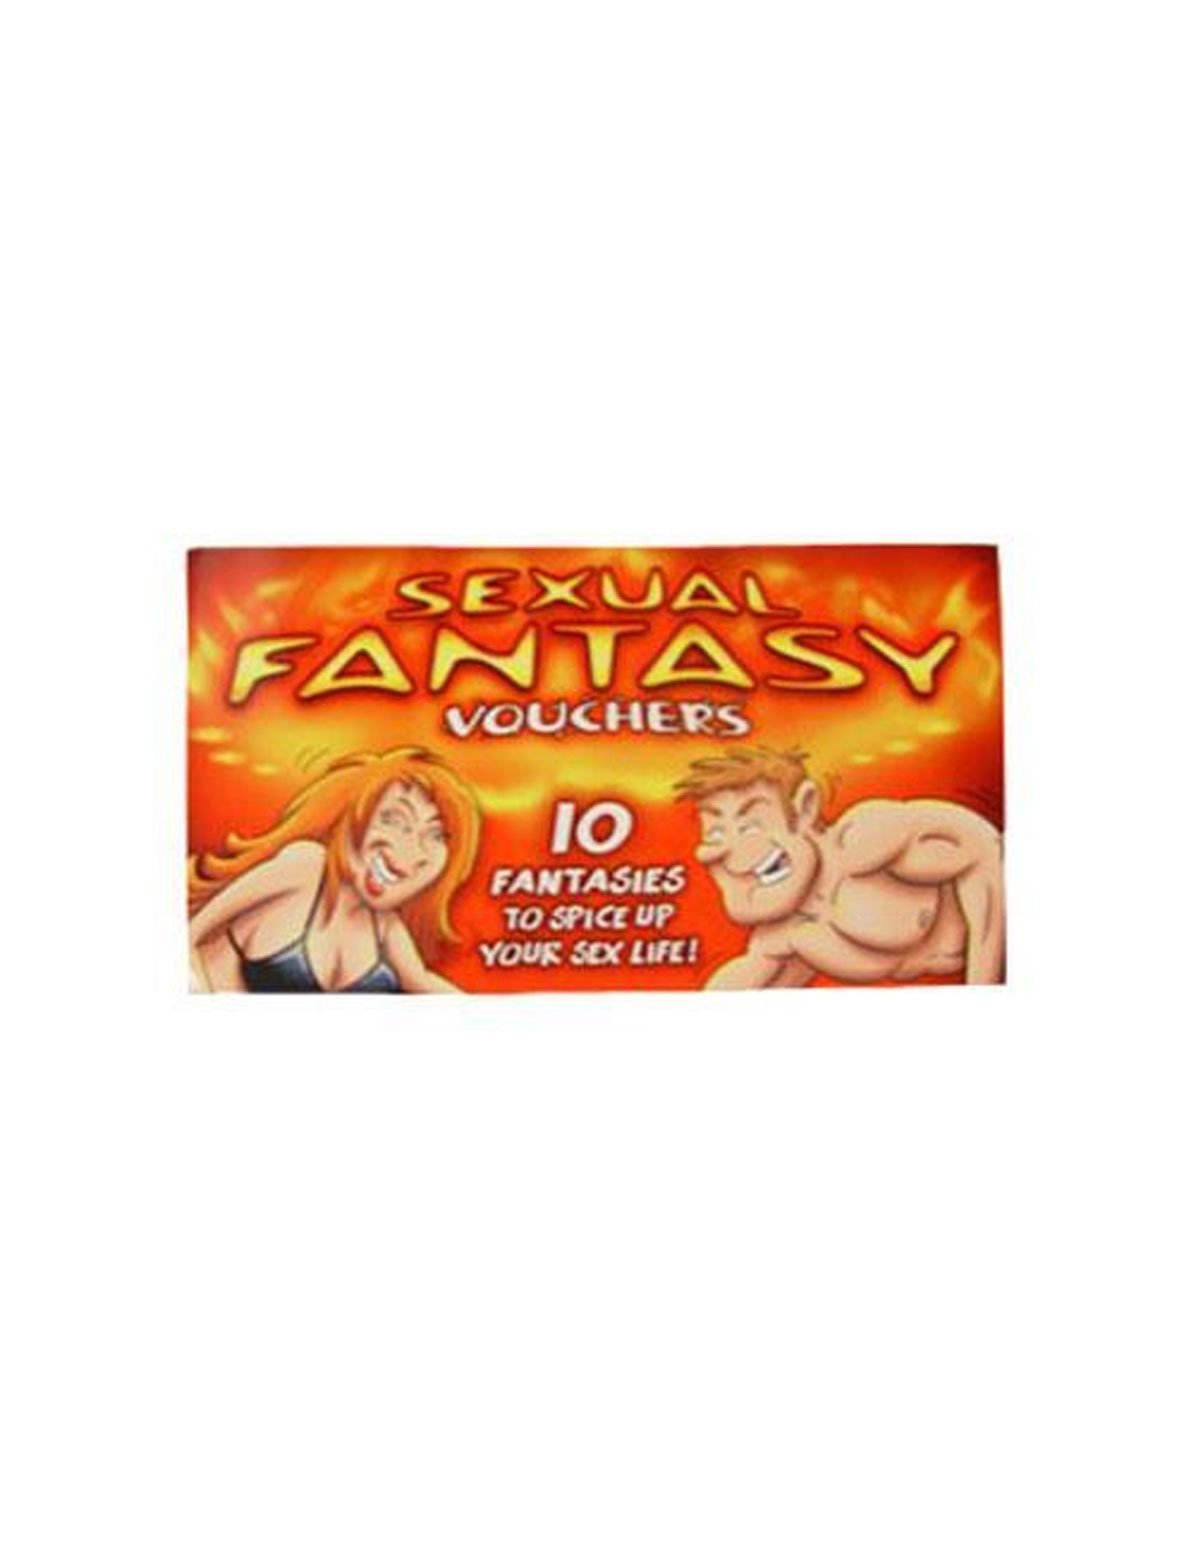 alternate image for Sexual Fantasy Vouchers Game